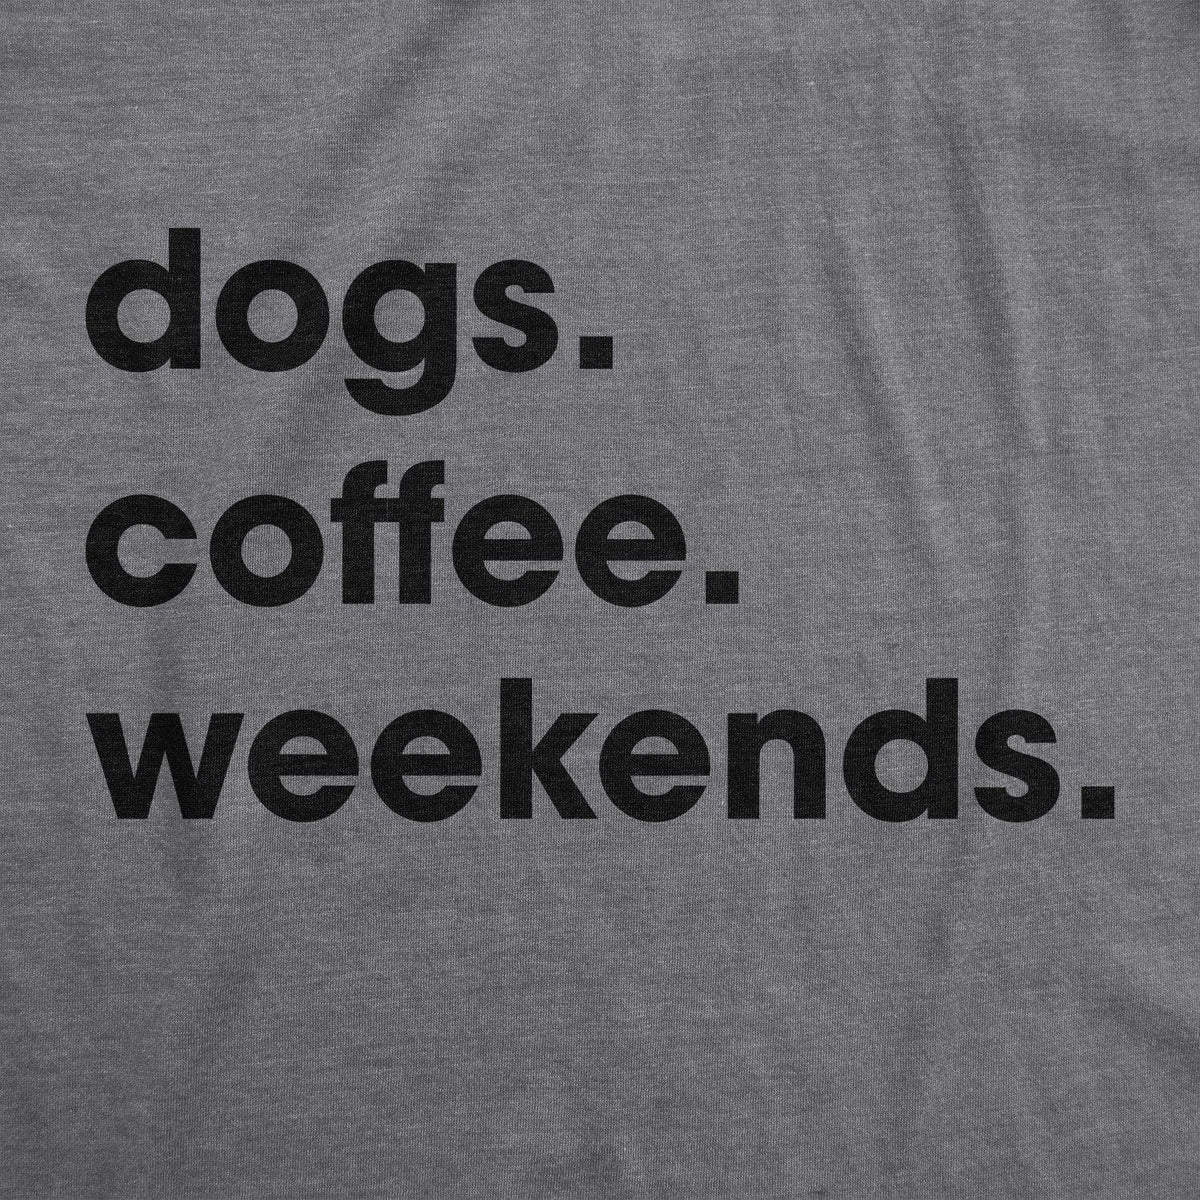 Dogs Coffee Weekends Women&#39;s Tshirt  -  Crazy Dog T-Shirts